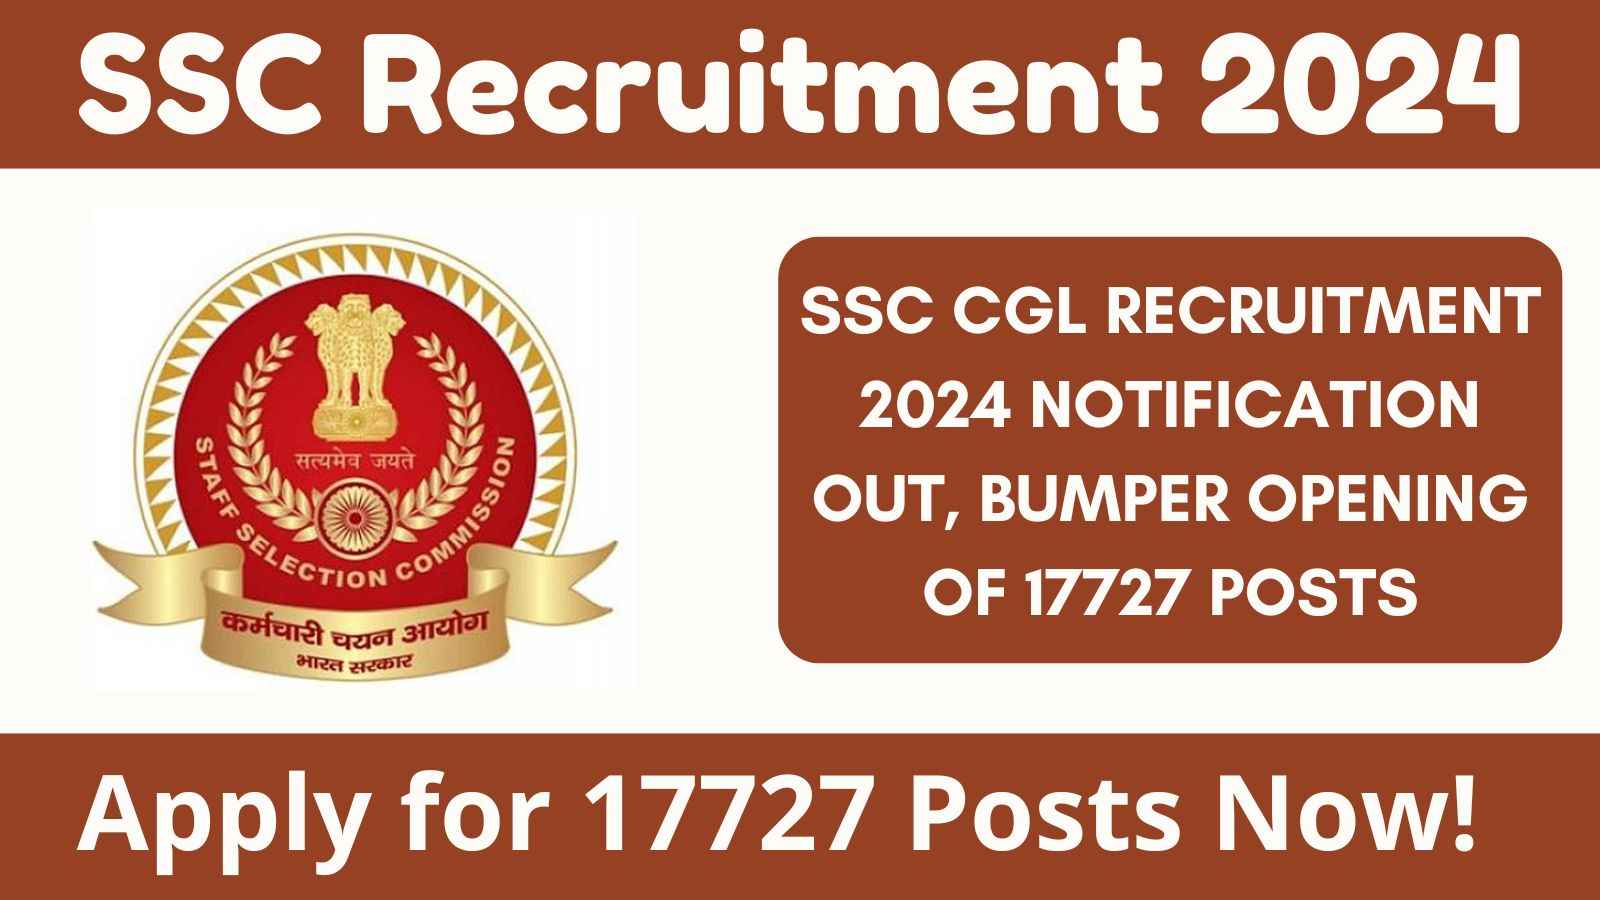 SSC CGL Recruitment 2024 Notification Out, Bumper Opening of 17727 Posts